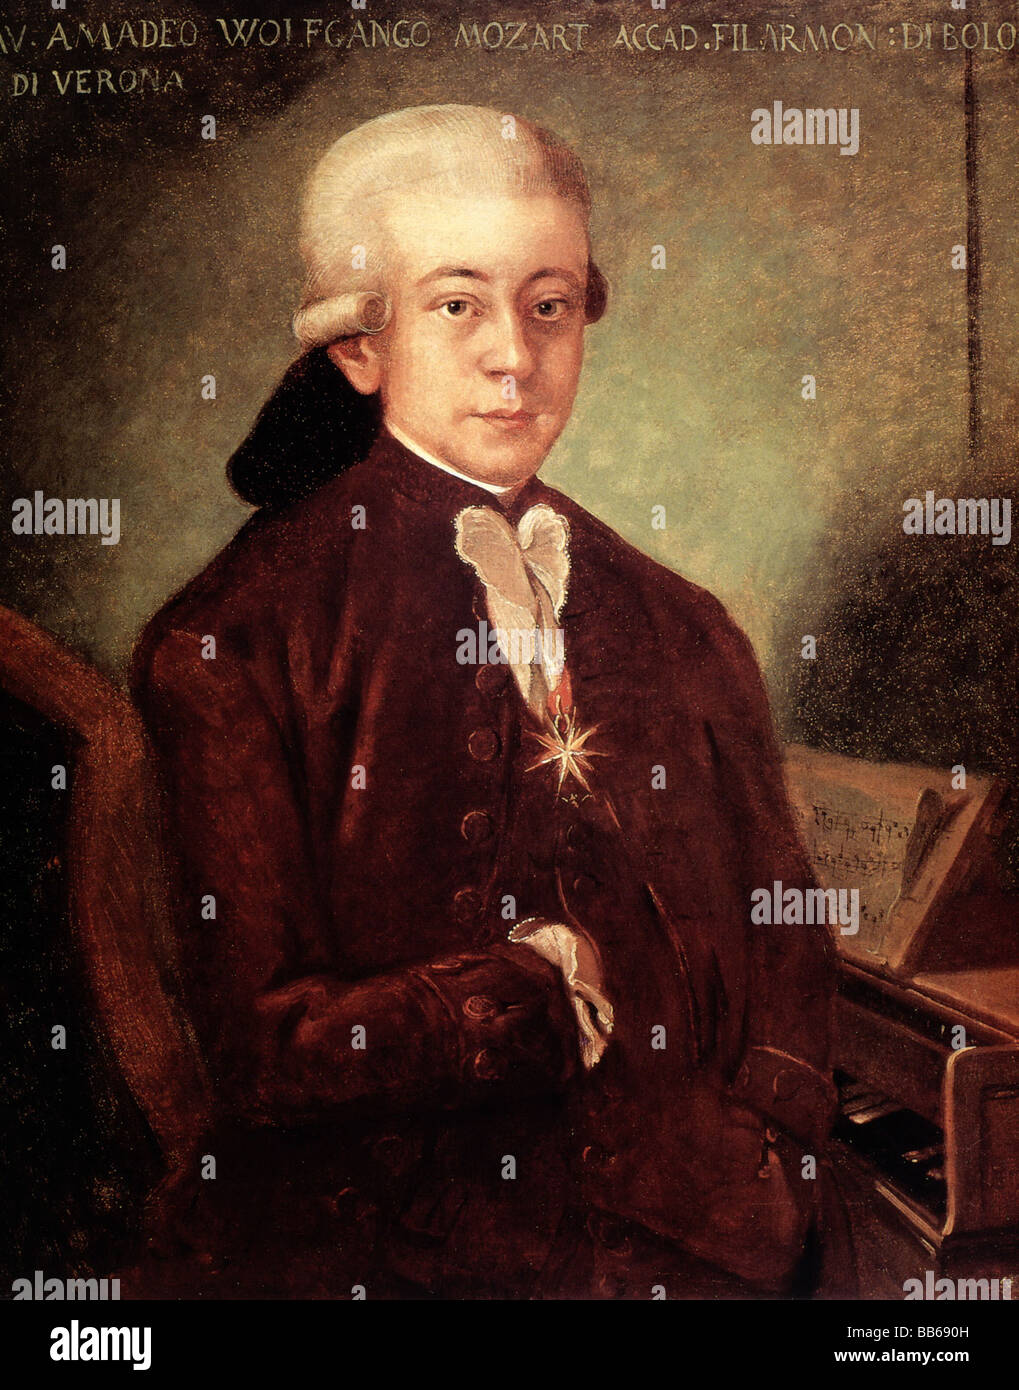 Mozart, Wolfgang Amadeus, 27.1.1756 - 5.12.1791, Austrian composer, as knight of the Order of the Golden Spur, painting, copy, , Stock Photo